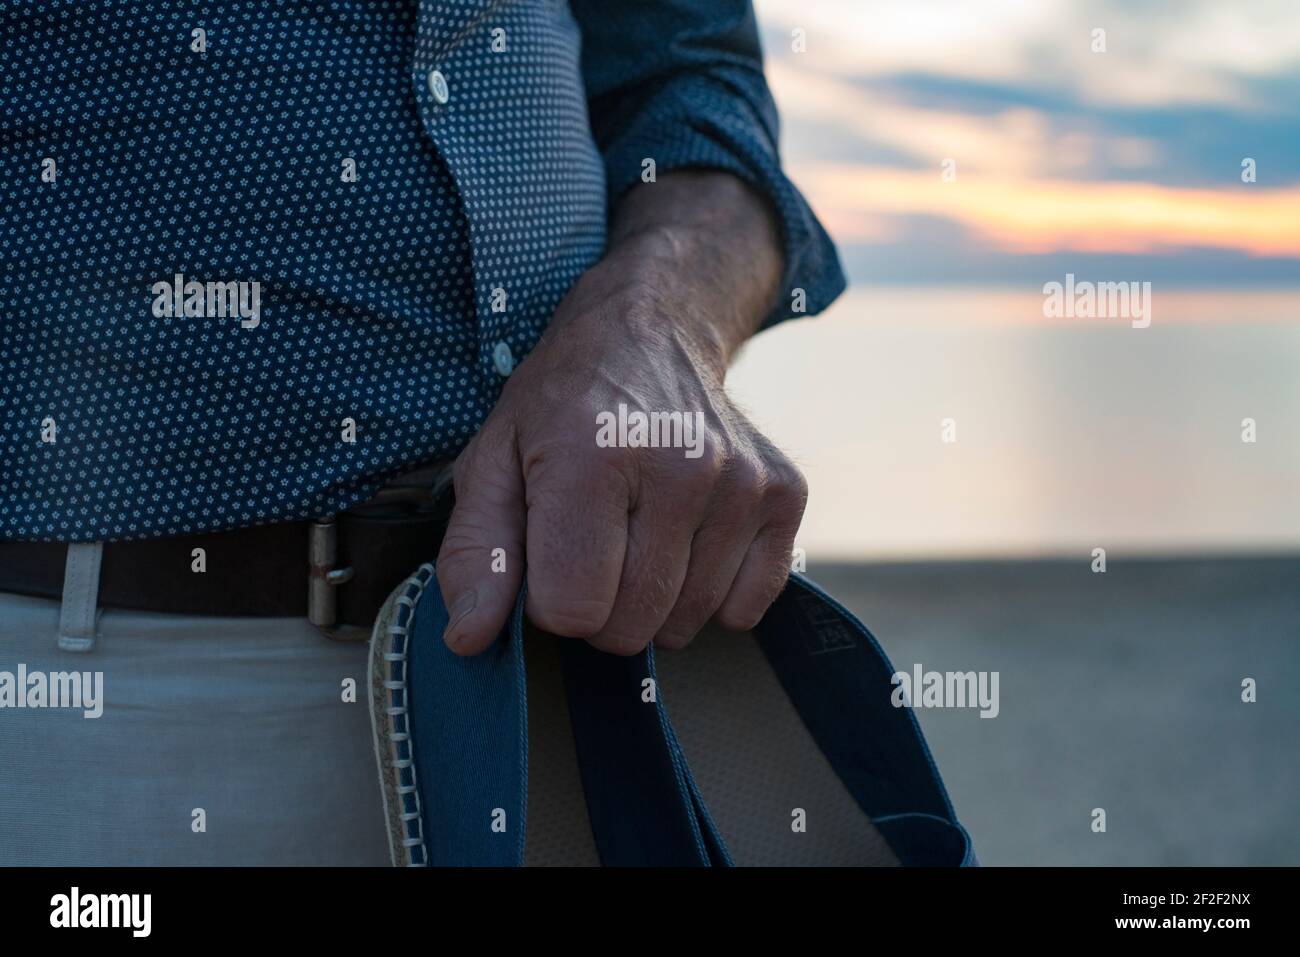 Holding In Hand High Resolution Photography and Images - Alamy